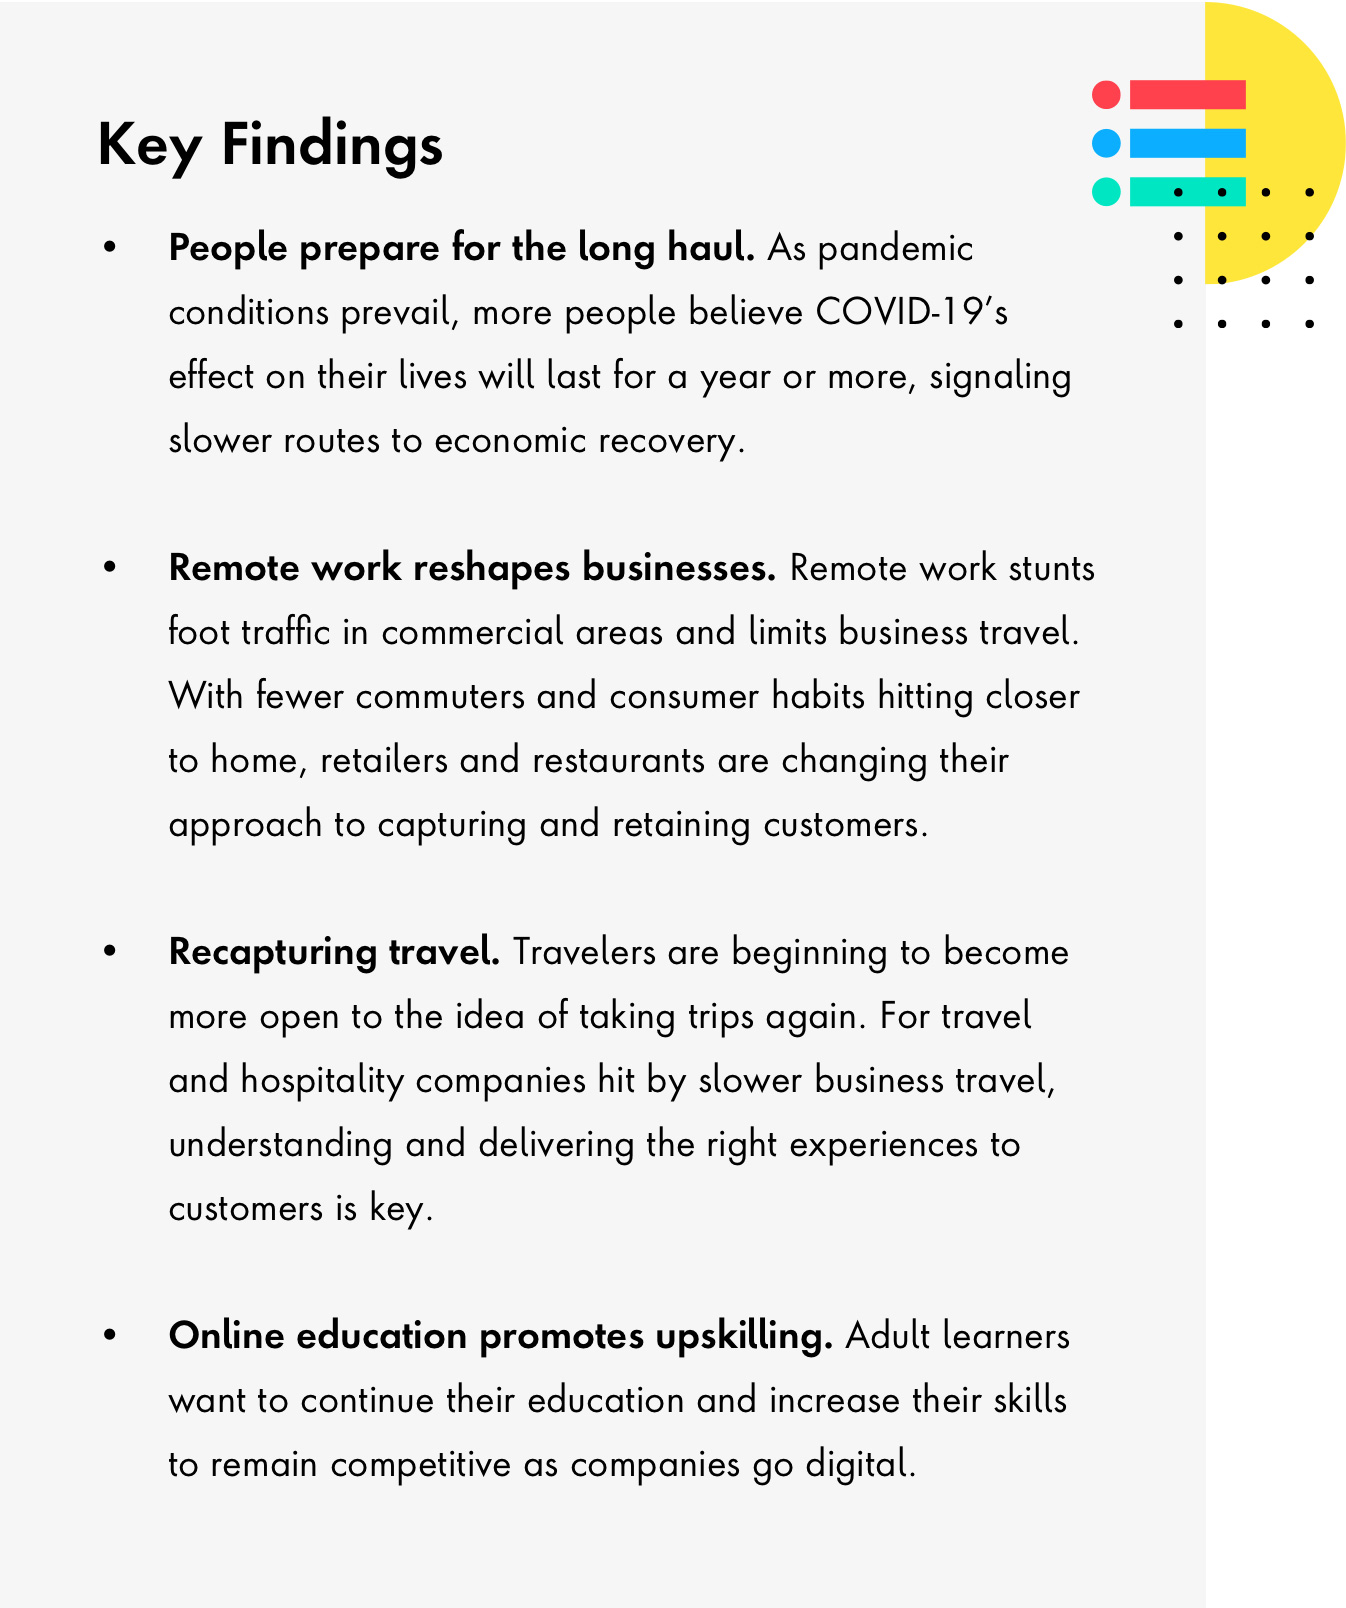 Key findings: People are preparing for the long haul as pandemic conditions prevail, Remote work stunts foot traffic in commercial areas, travelers are beginning to open up to trips again, and adult learners are continuing education through online learning. 